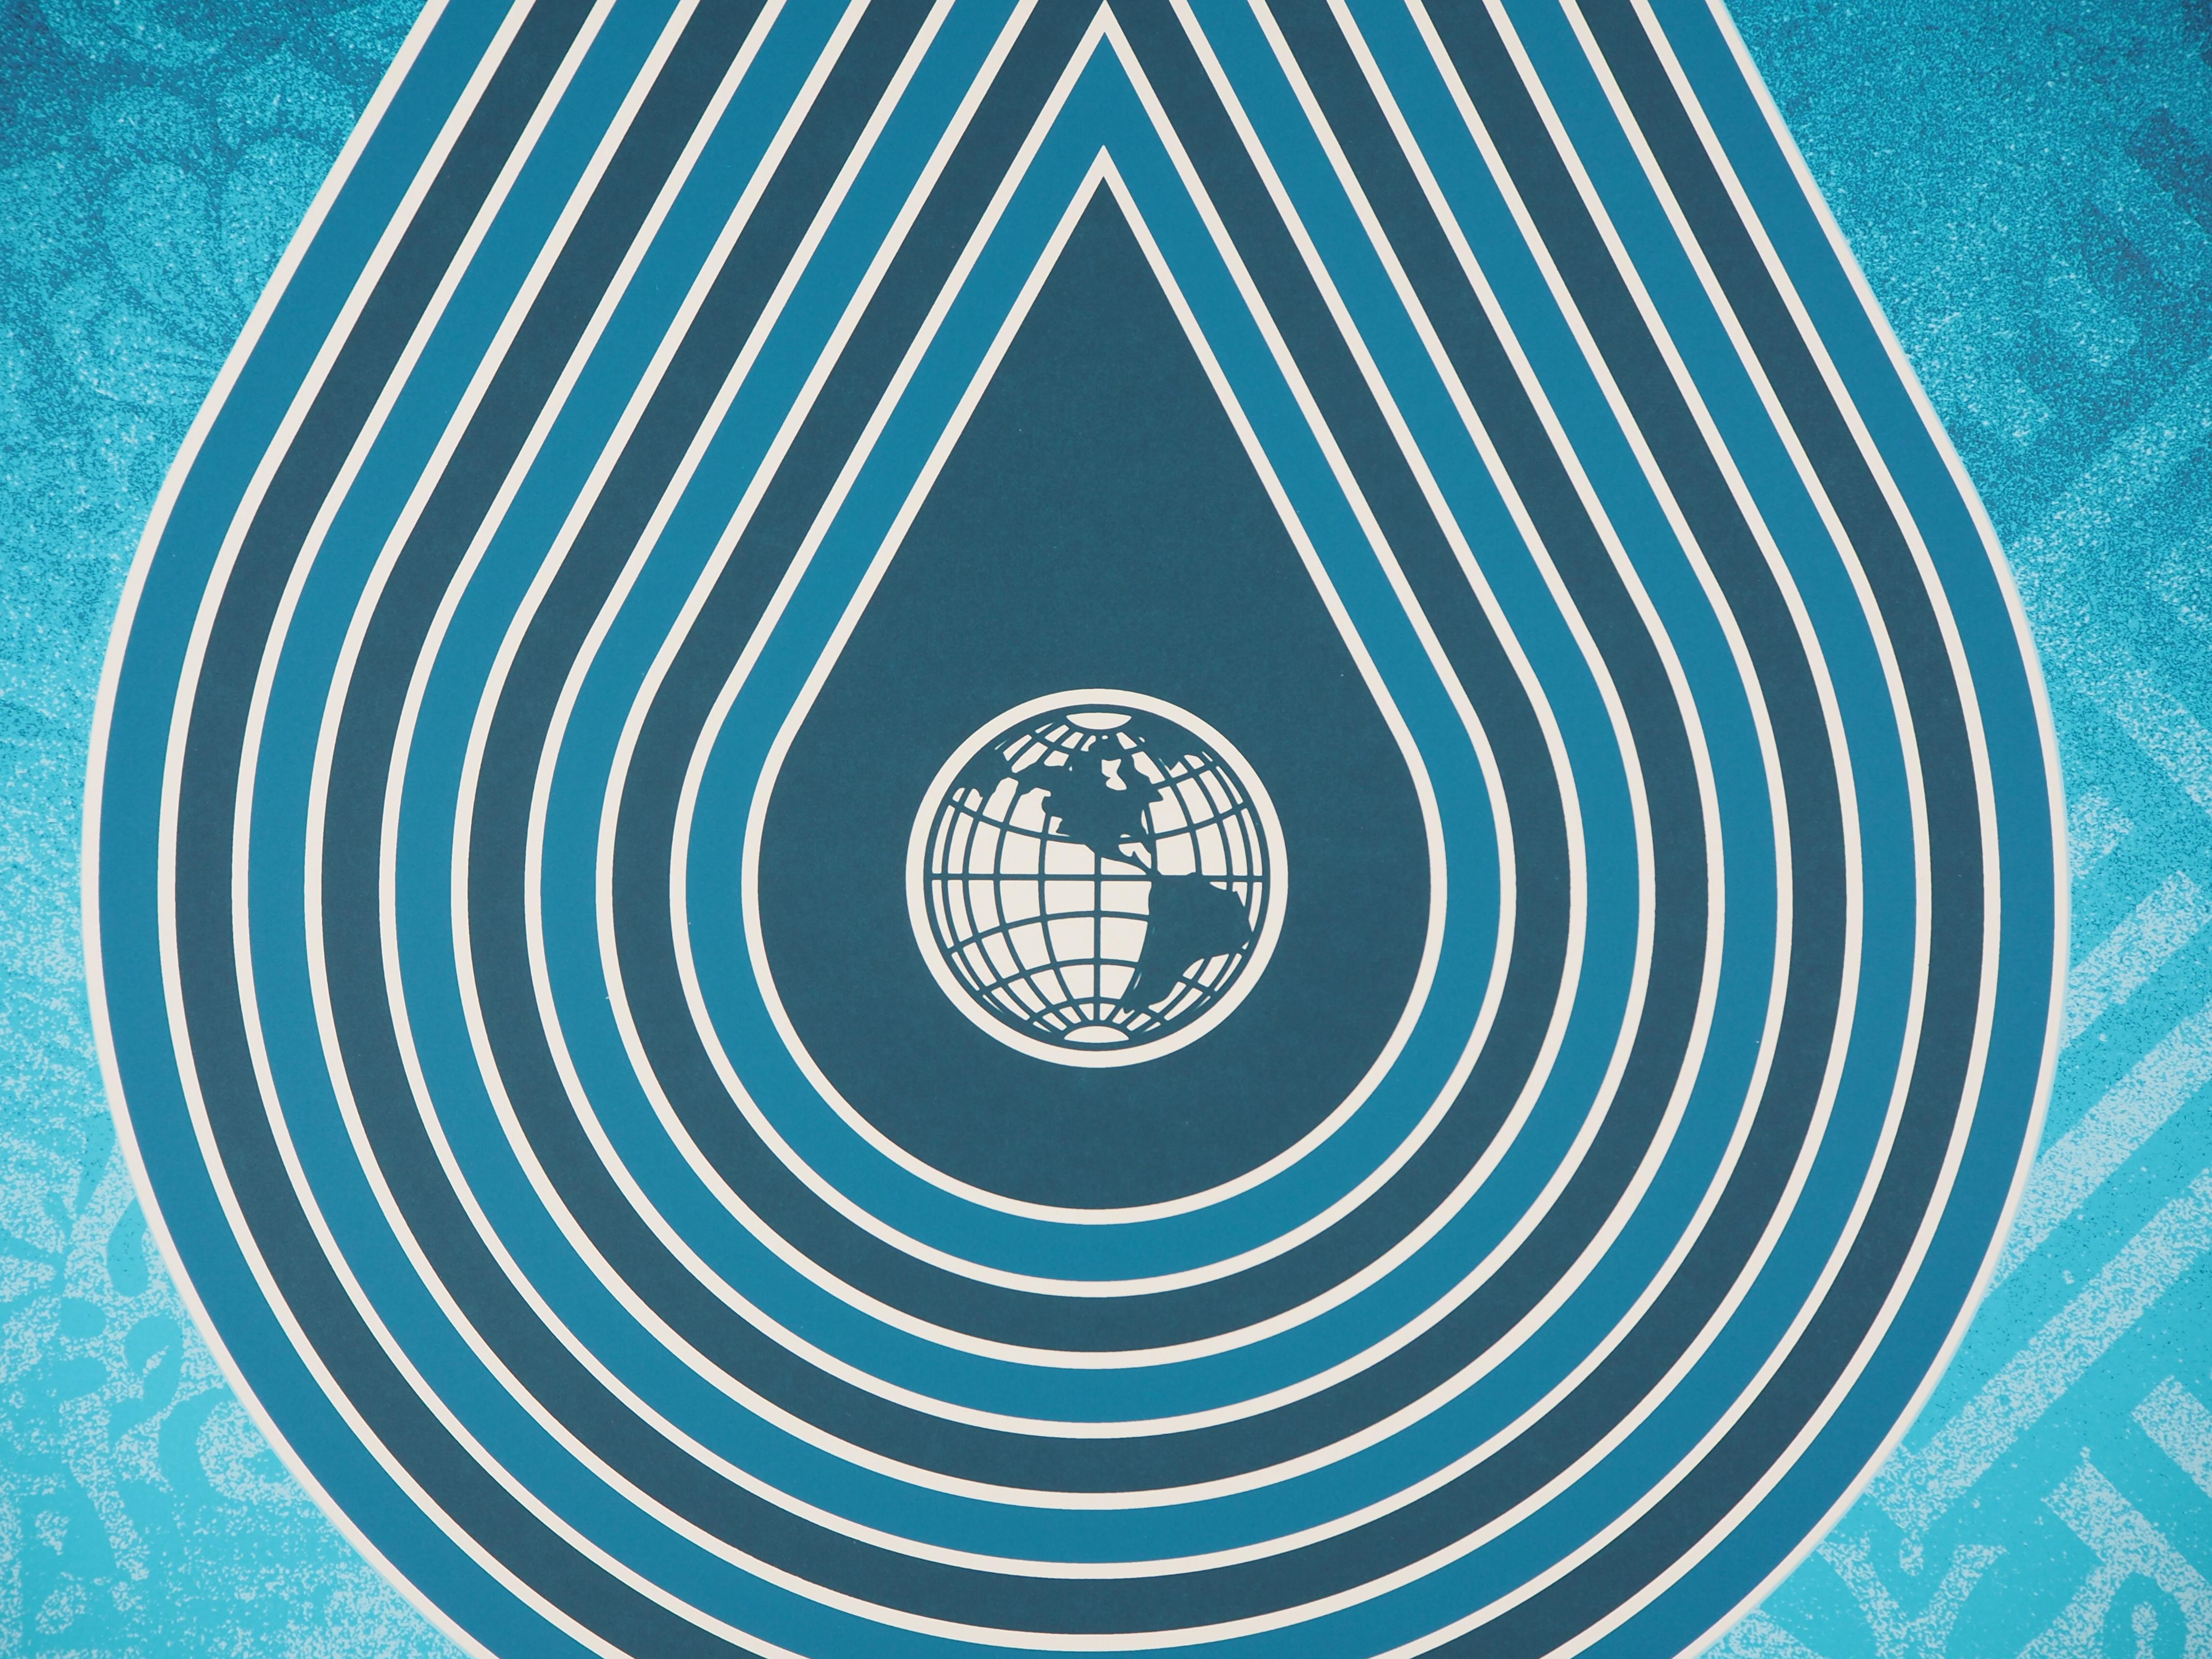 Ecology : Protect the Planet (Earth Crisis) - Tall screenprint signed & numbered - Blue Figurative Print by Shepard Fairey